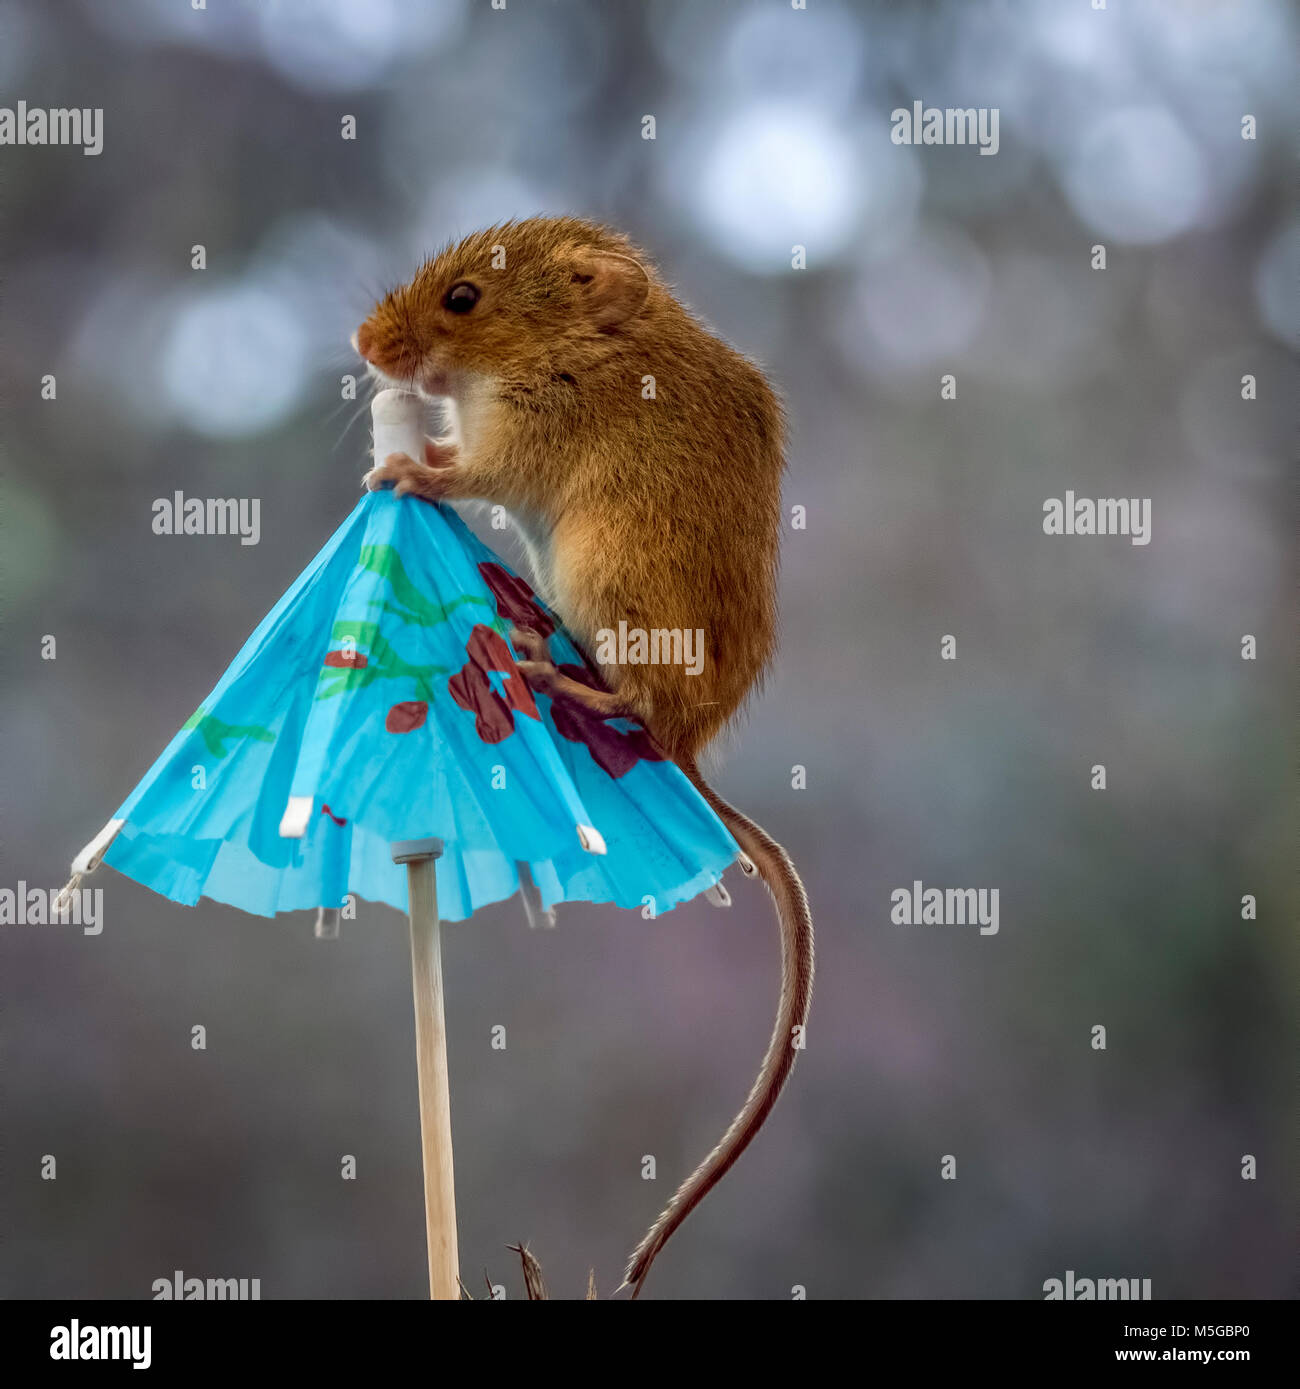 Macro images of Harvest Mice outdoors Stock Photo